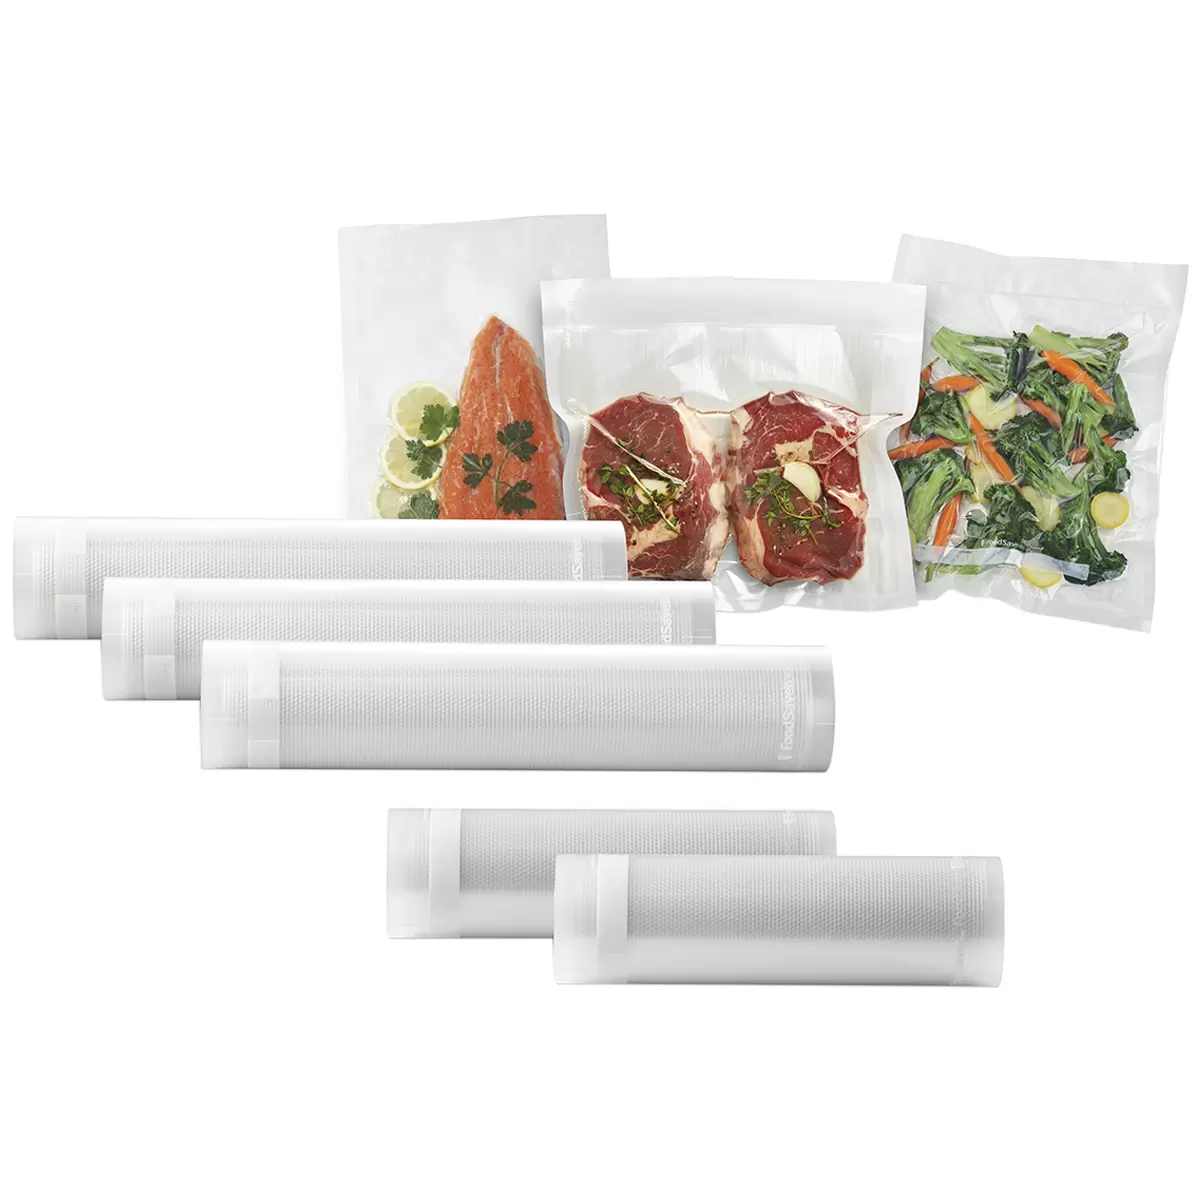 Food Saver Combo packer Combo pack